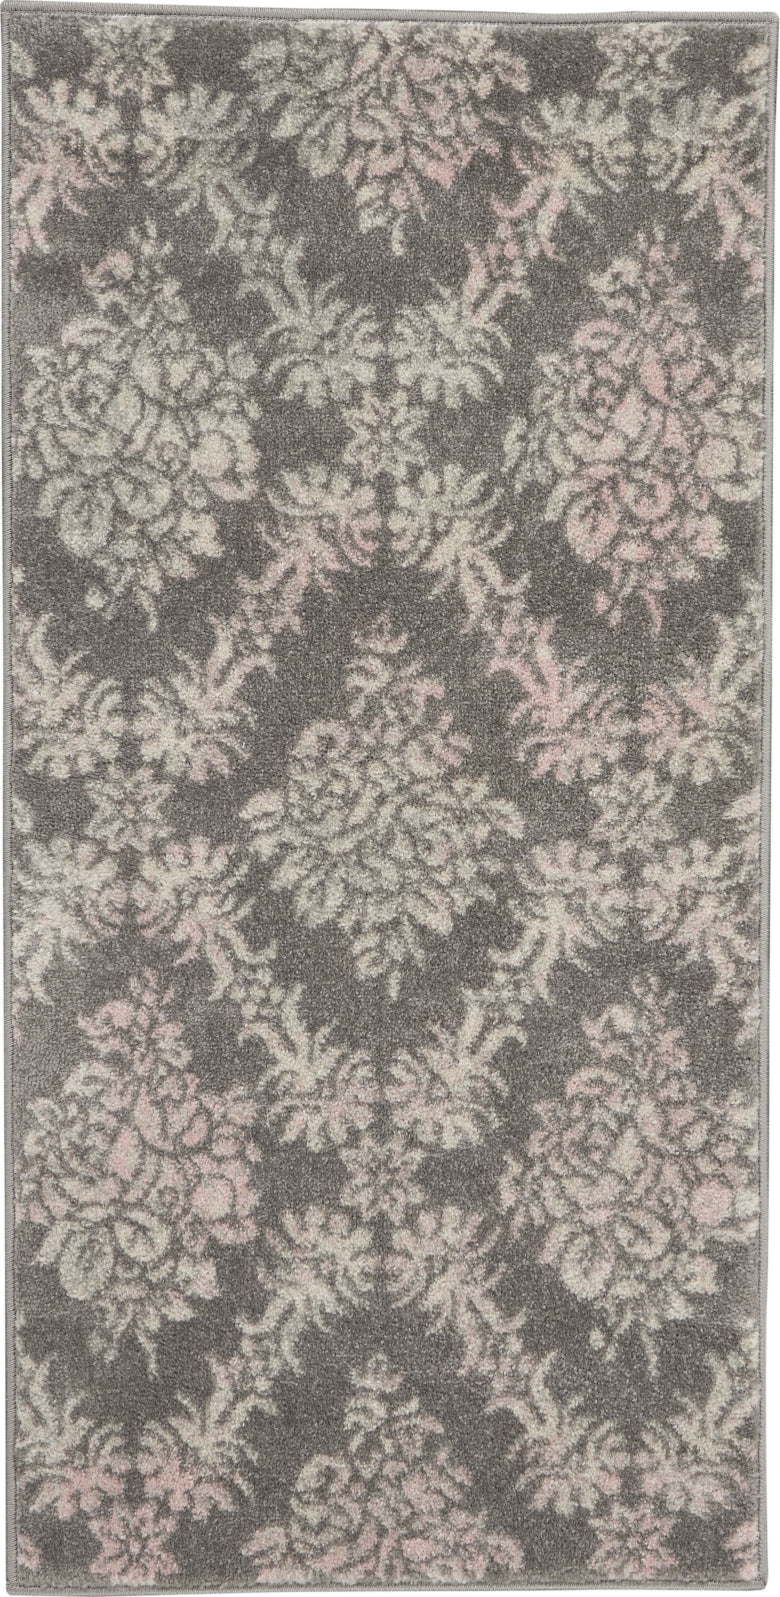 Tranquil TRA09 Grey/Pink Area Rug by Nourison main image